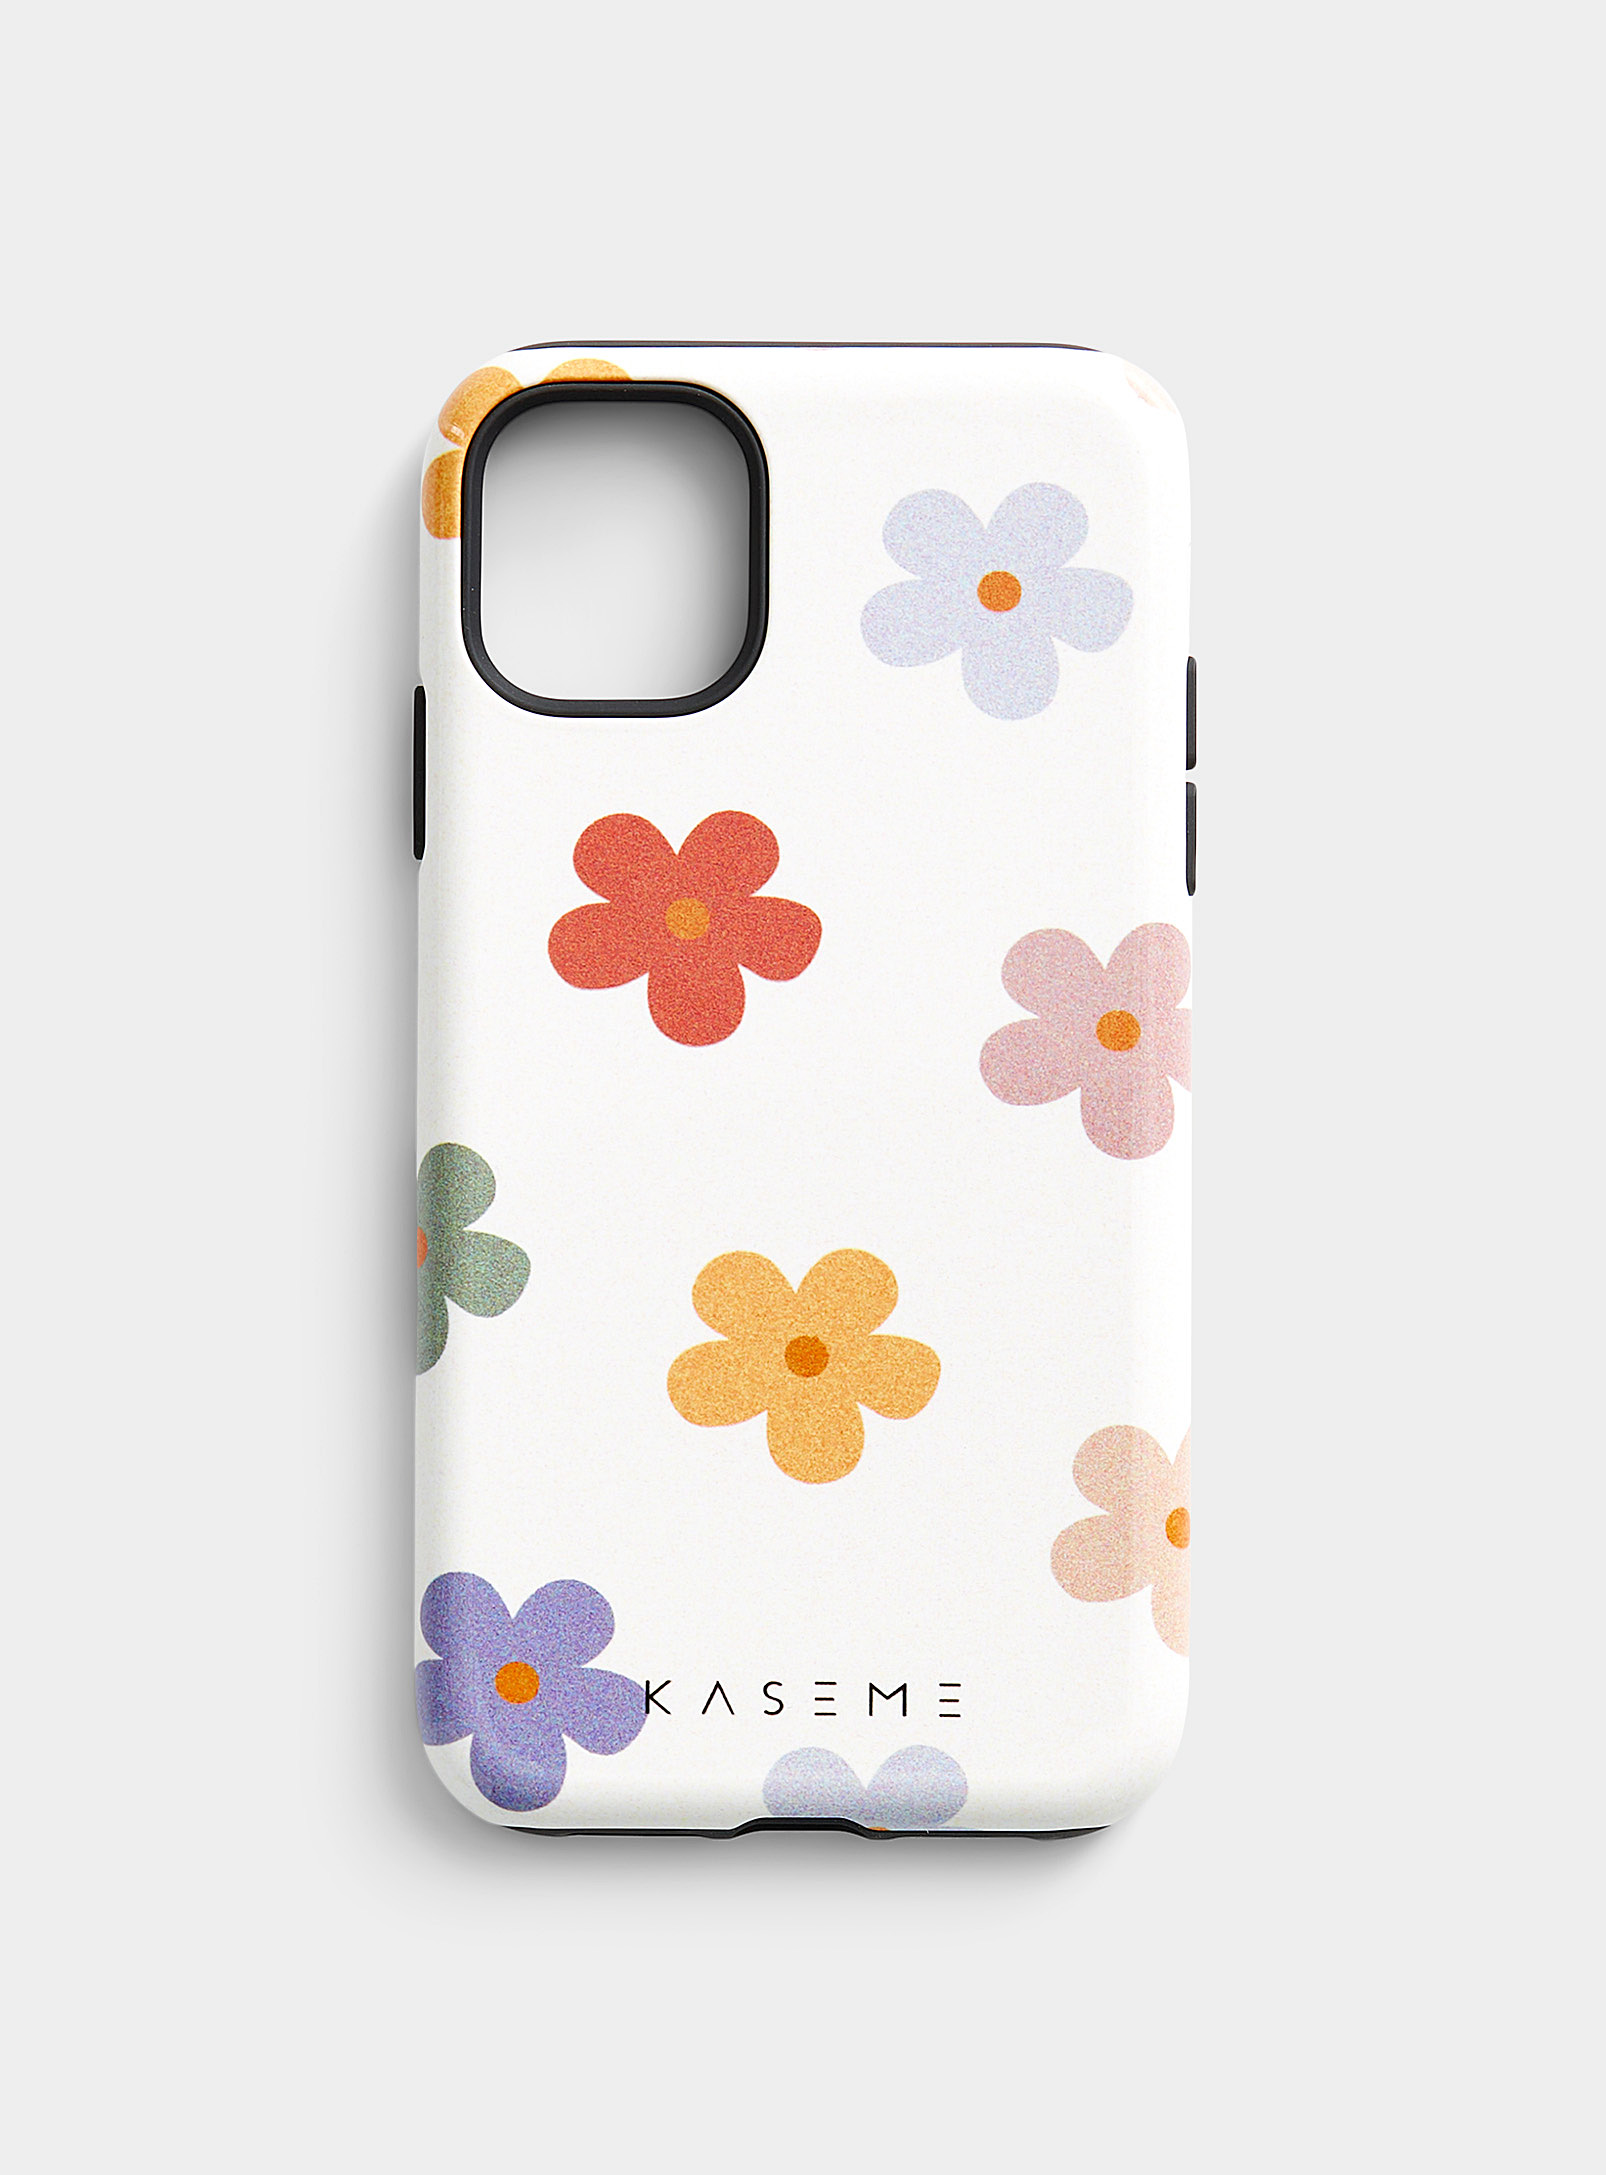 Kaseme Patterned Case For Iphone 11 In Assorted